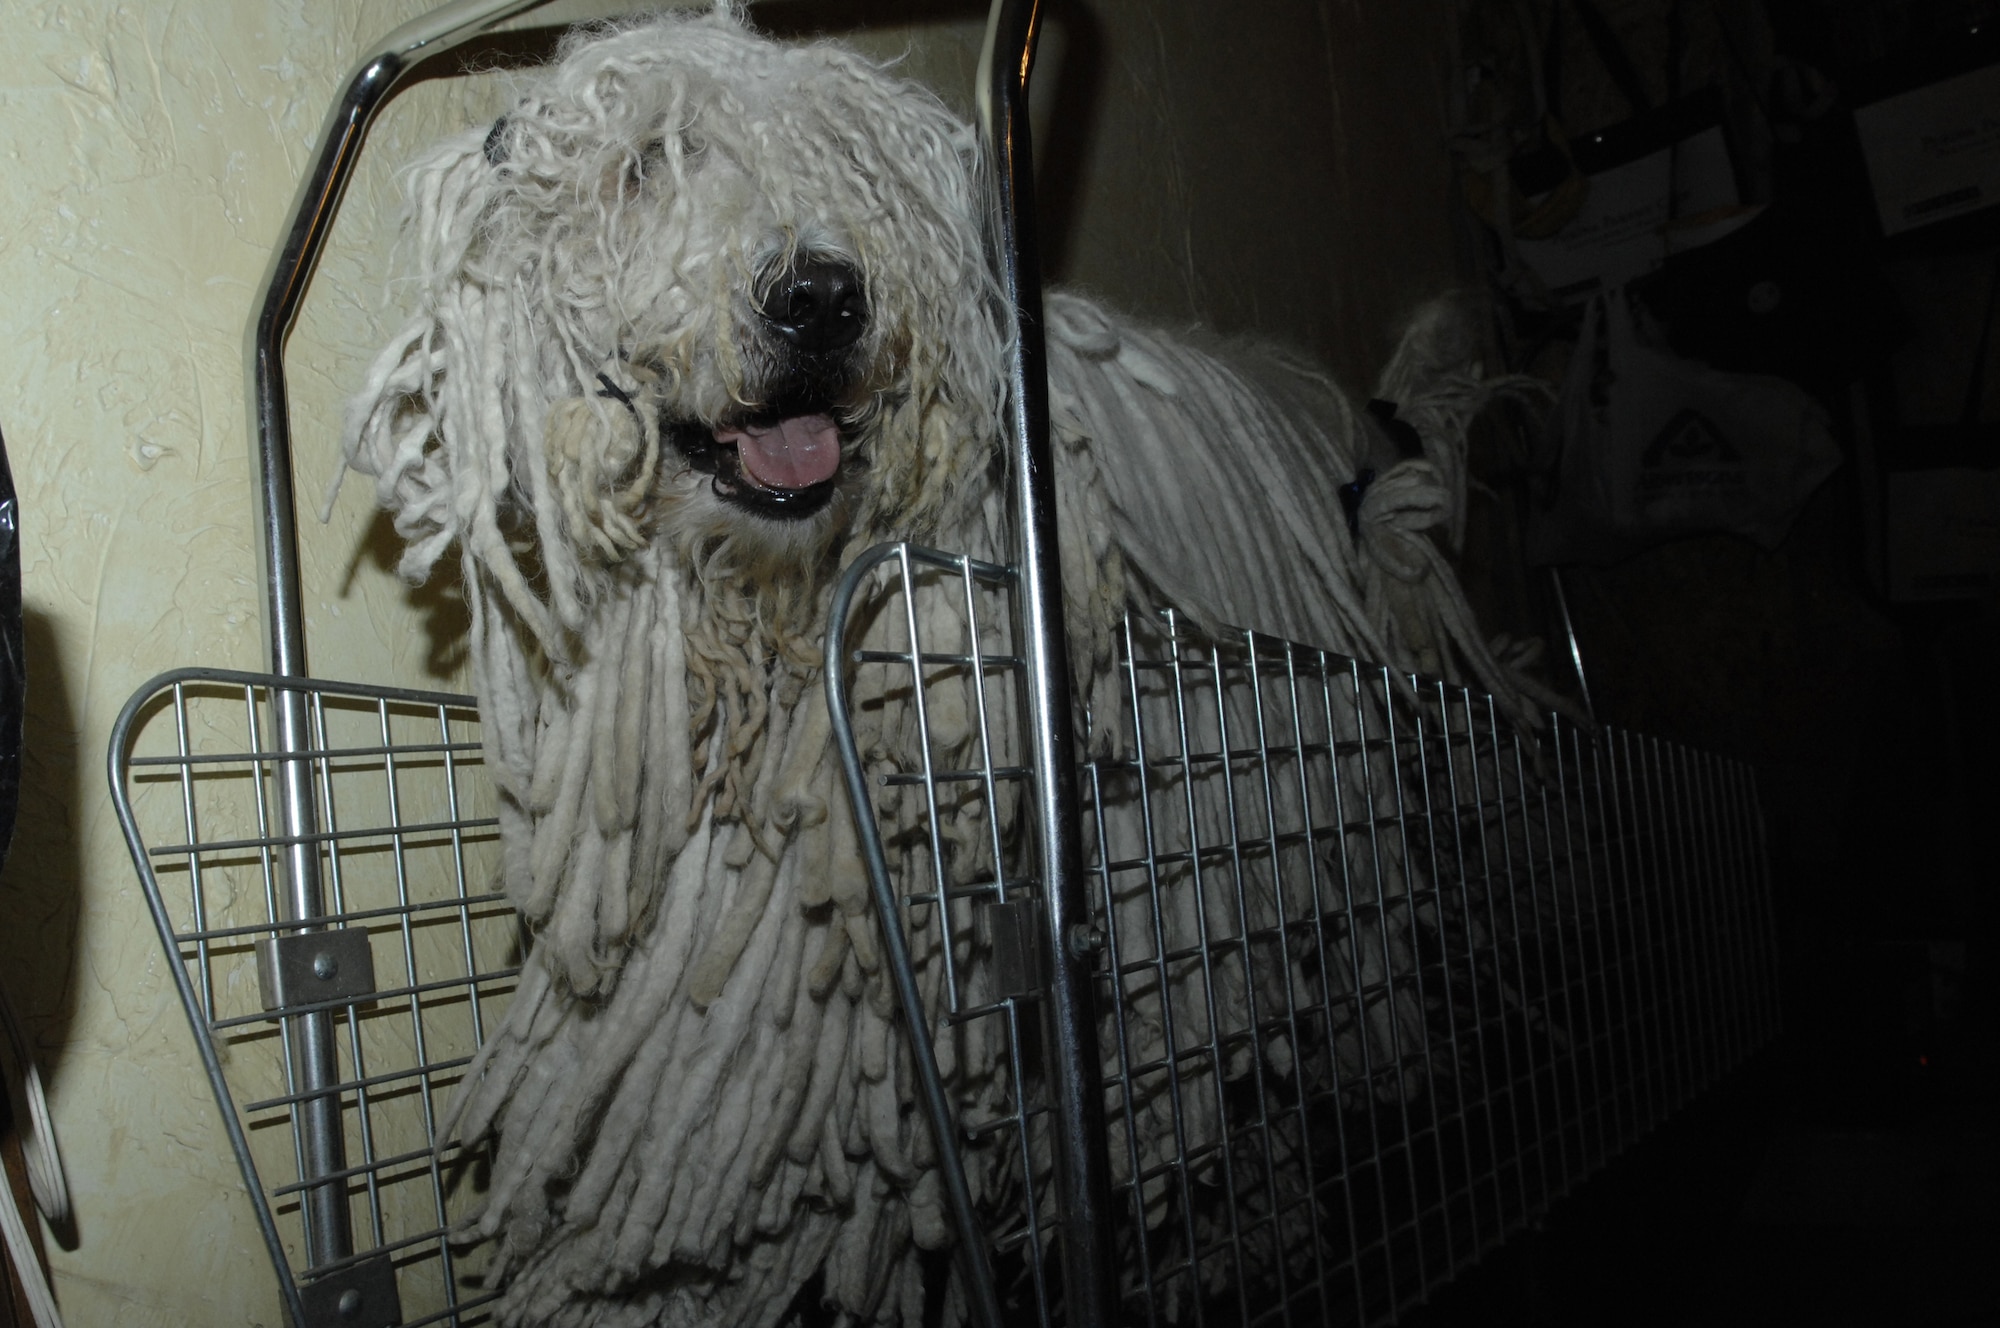 Chaos takes a brisk jog on a treadmill as he waits for bath time. Master Sgt. Adrienne Freyer, 28th Bomb Wing Plans and Evaluations superintendent, uses a specially designed treadmill to help keep her Champion Kyllburg, Chaos, in shape. Chaos, a 115-pond Komondor, is ranked as the top Komondor male in the United States. This show dog knows how to compete, winning best of breed and best bred Dec. 2, during the 2007 American Kennel Club/ Eukanuba National Invitational Dog Show in Long Beach, Calif. This show continued a trend started in October where he won best in breed and back-to-back group ones in Minnesota, Oct. 6 and 7; and back in Rapid City, S.D., won best in breed Oct. 19 through 21, Group 4 Oct. 20 and Group 3 Oct. 21. (U.S. Air Force photo/Senior Airman Angela Ruiz)